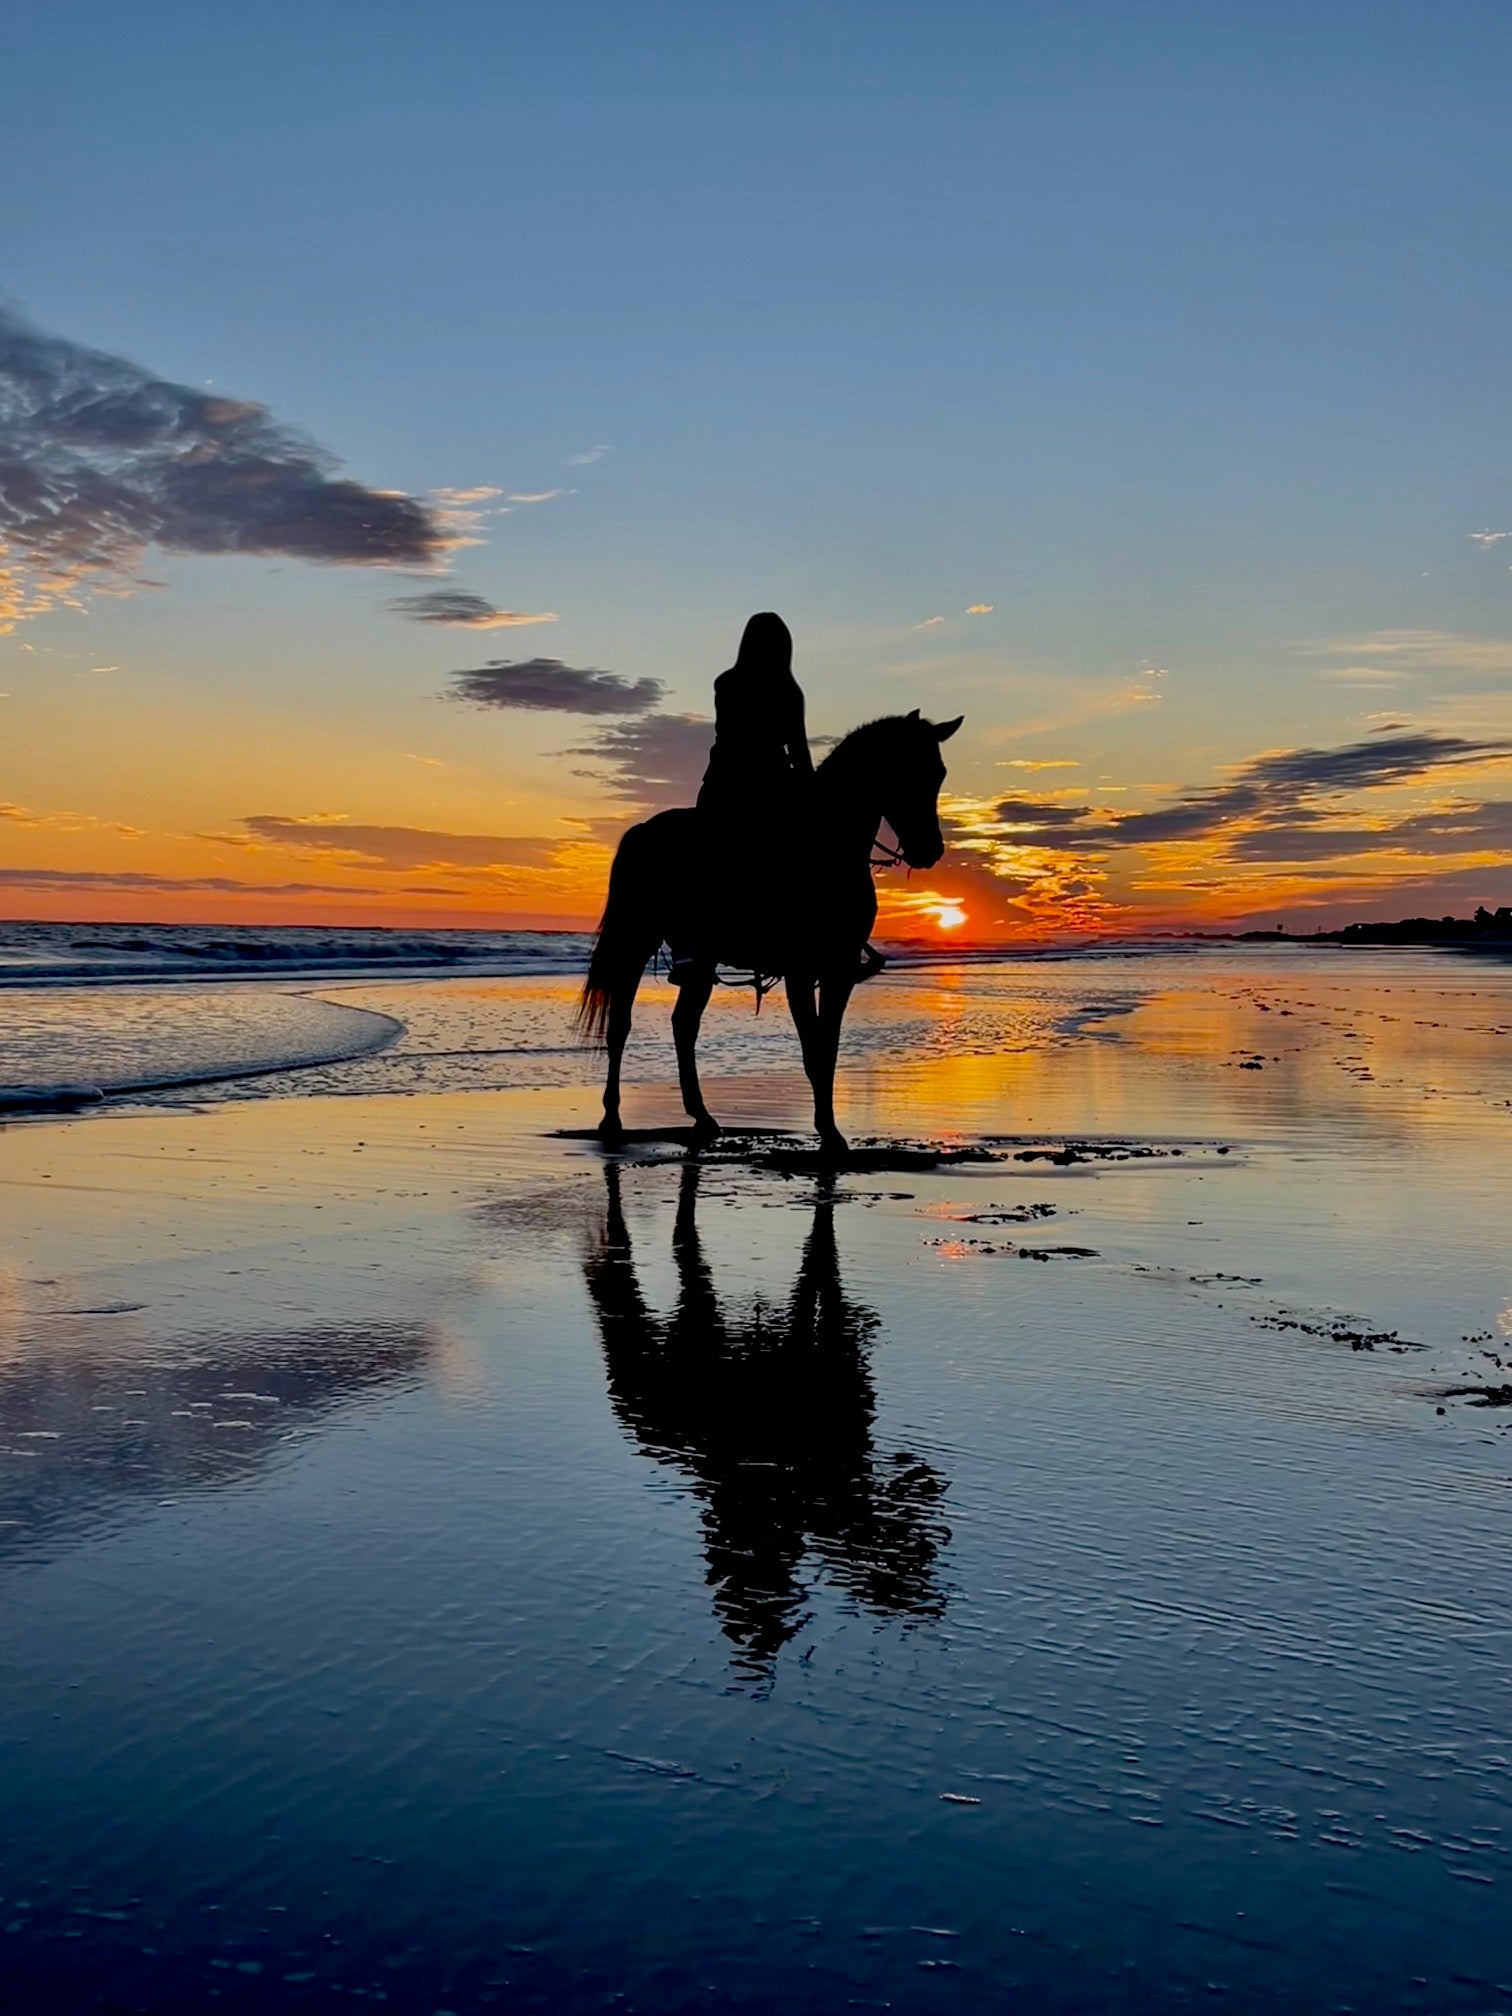 Horse and rider on the beach at sunset, Cape Hatteras